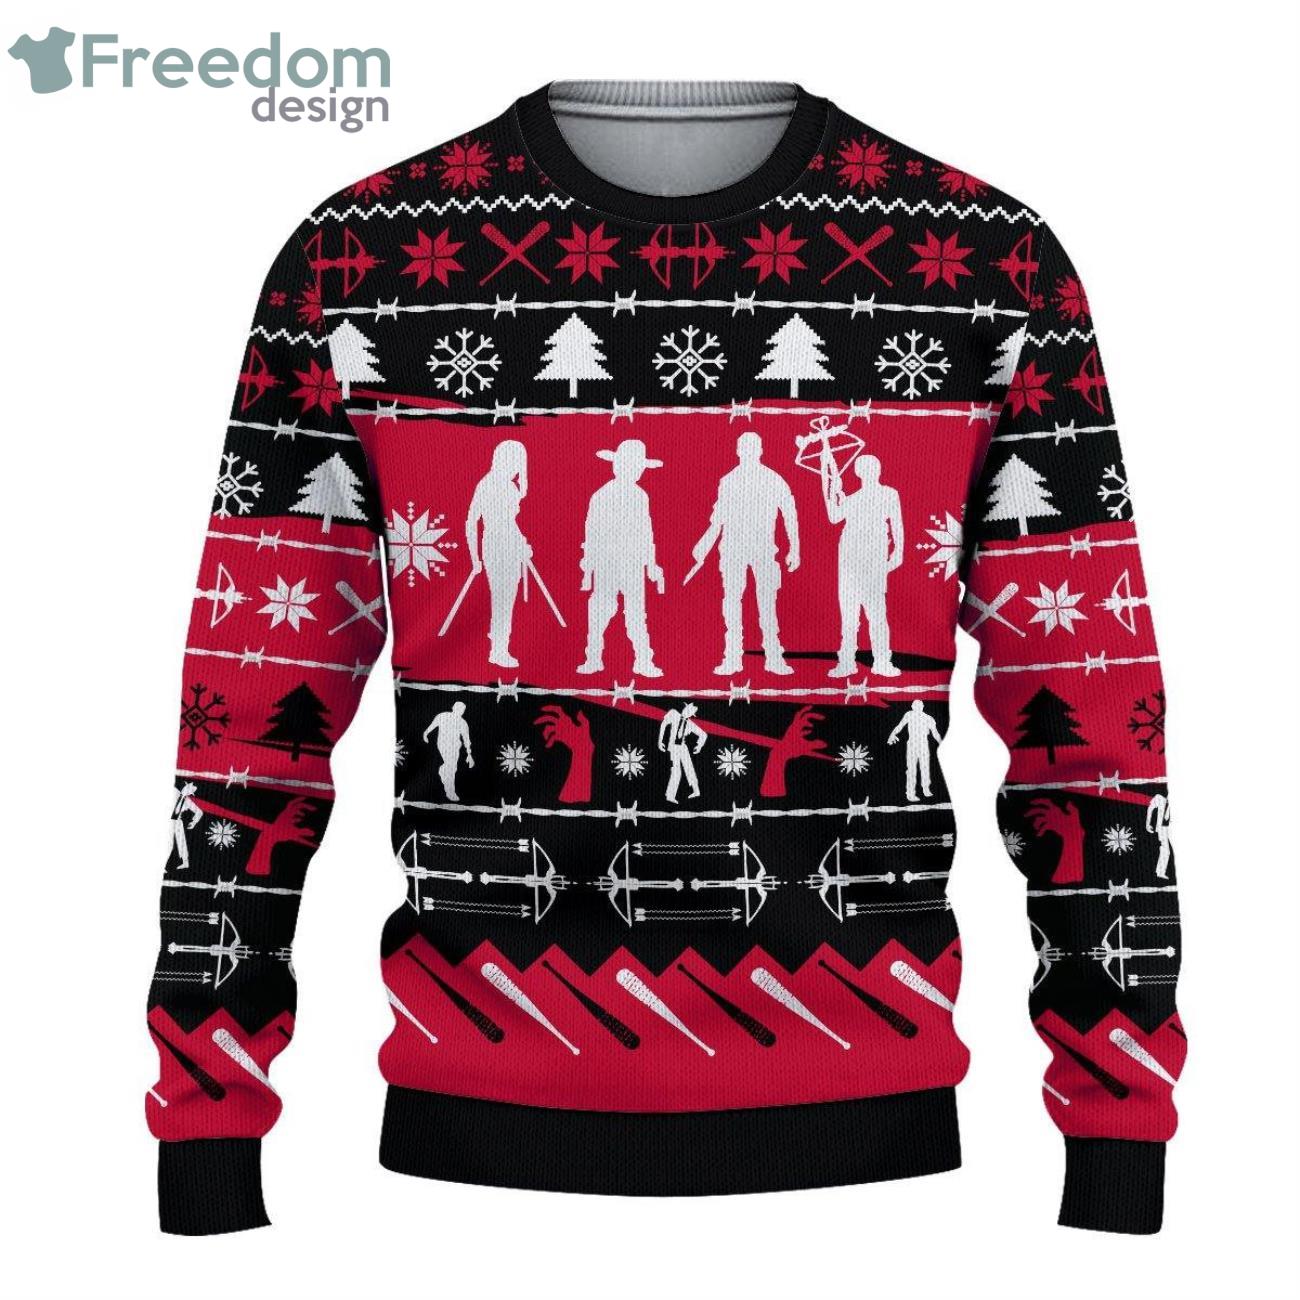 The Walking Dead Ugly Christmas Sweater Product Photo 1